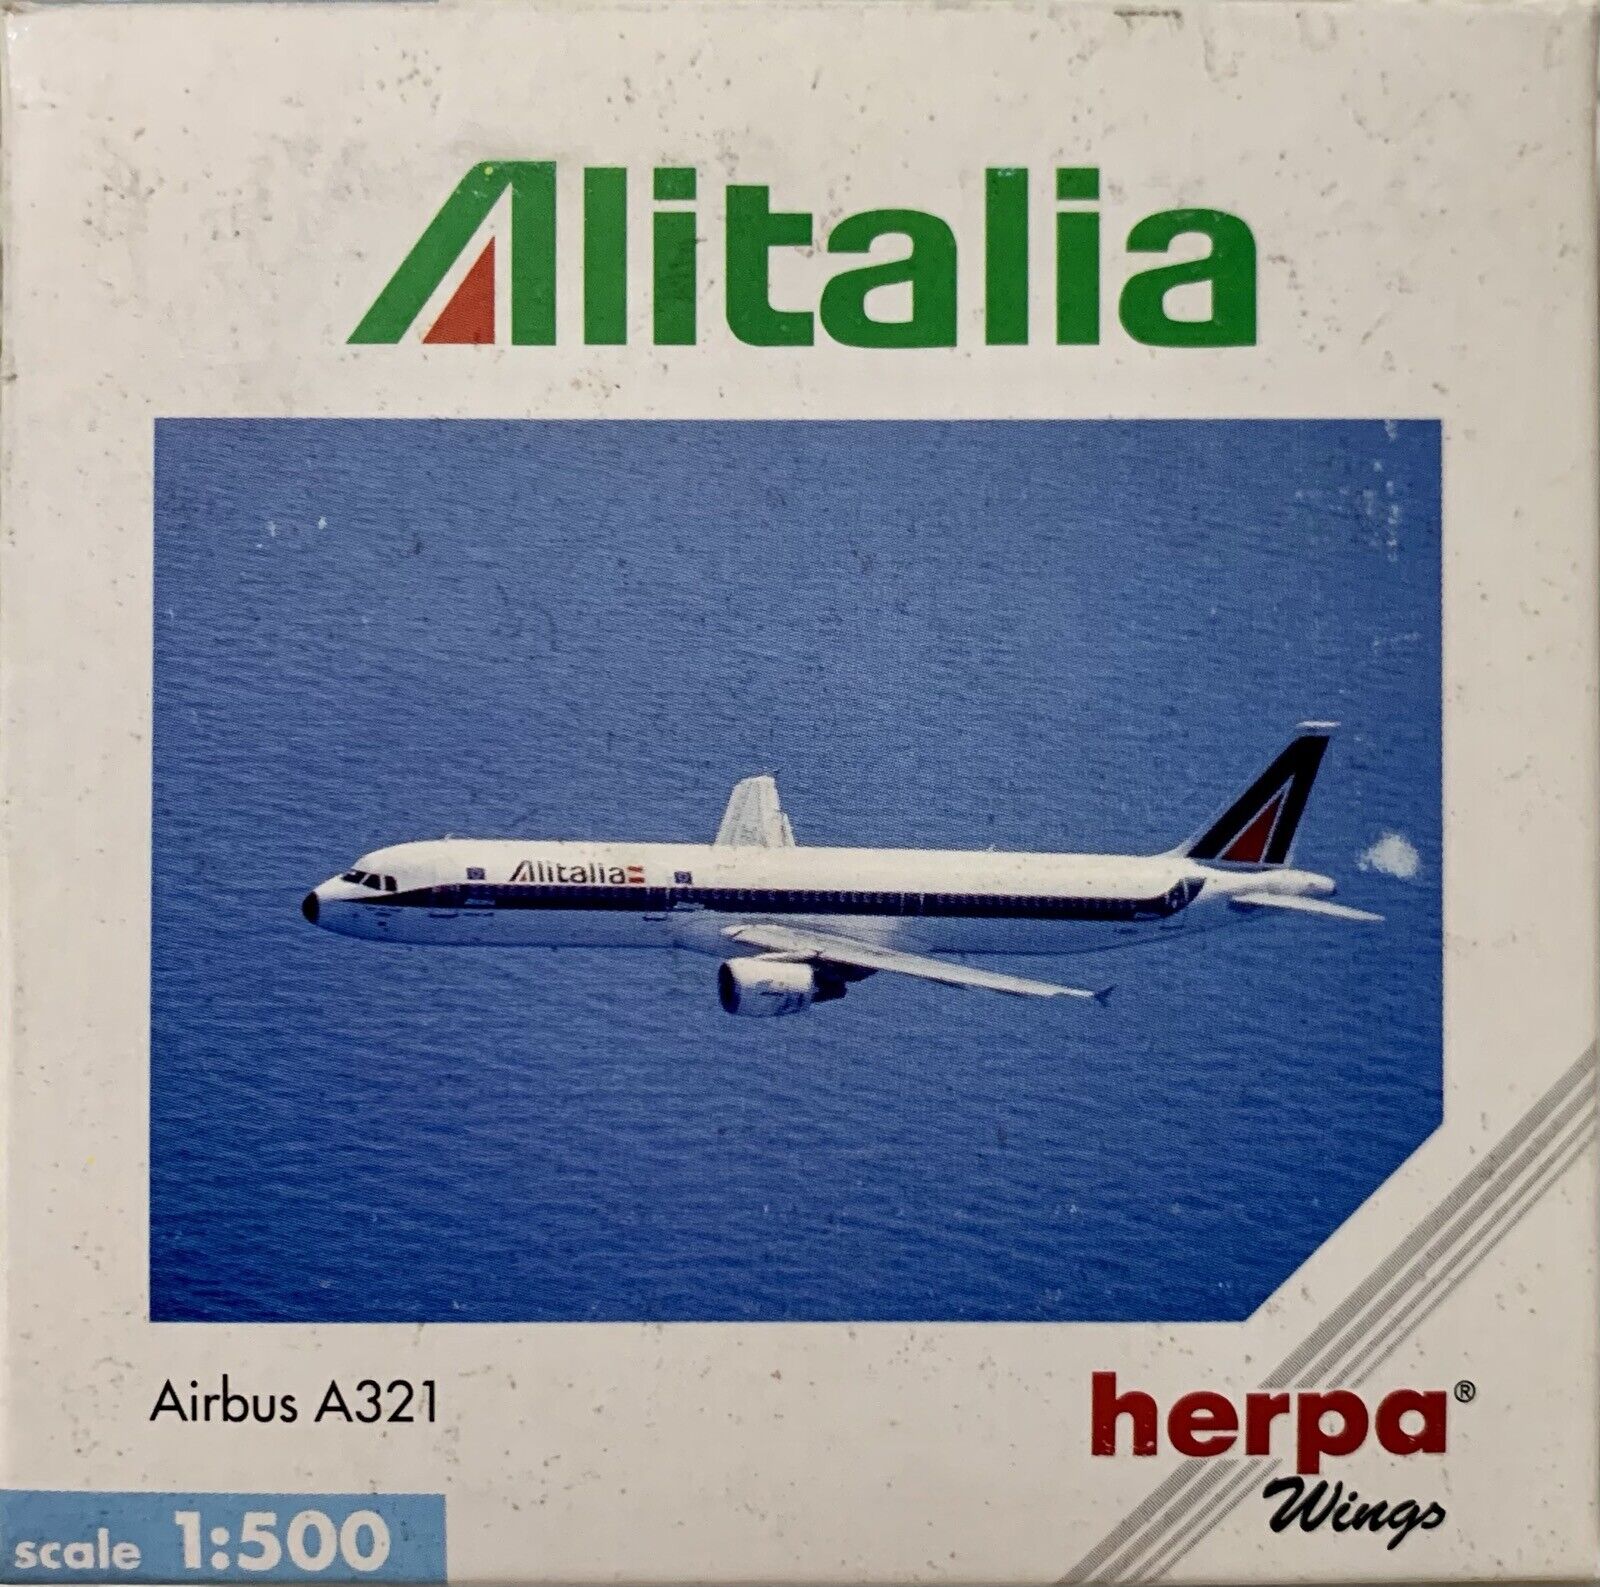 Herpa Wings Alitalia Airbus A321 Old Livery Scale 1:500 HE508698